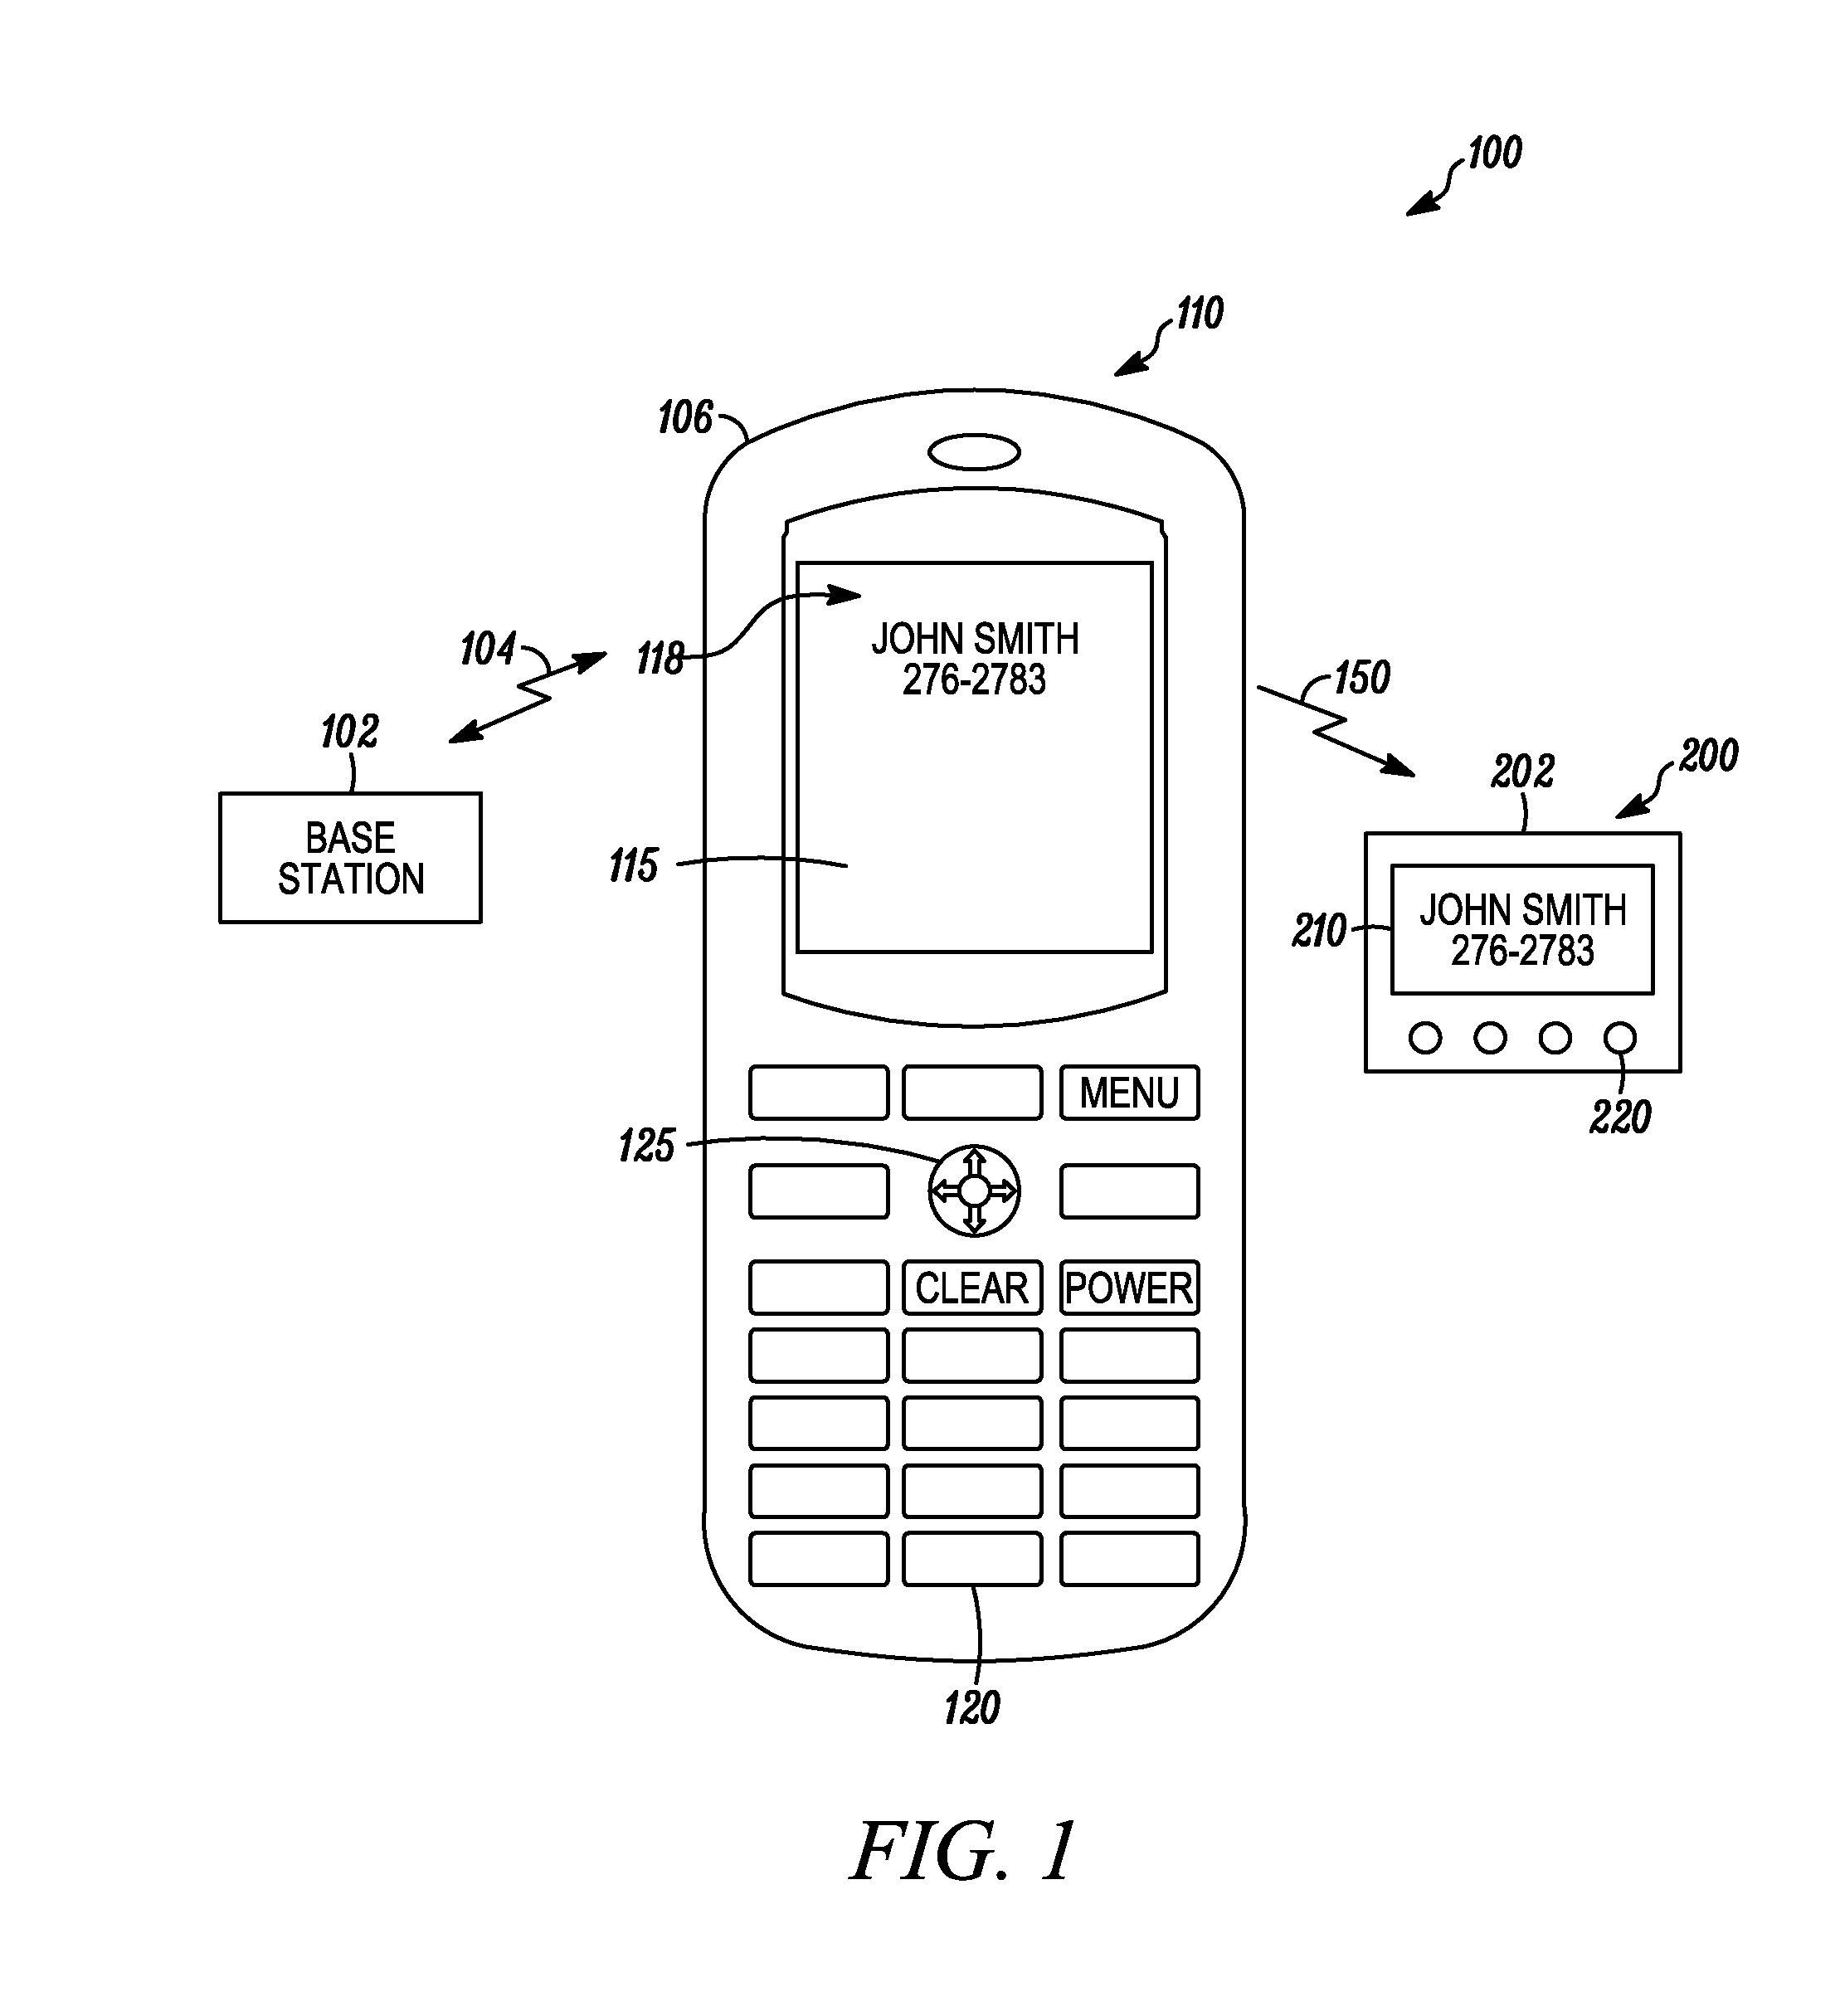 Remote notification device